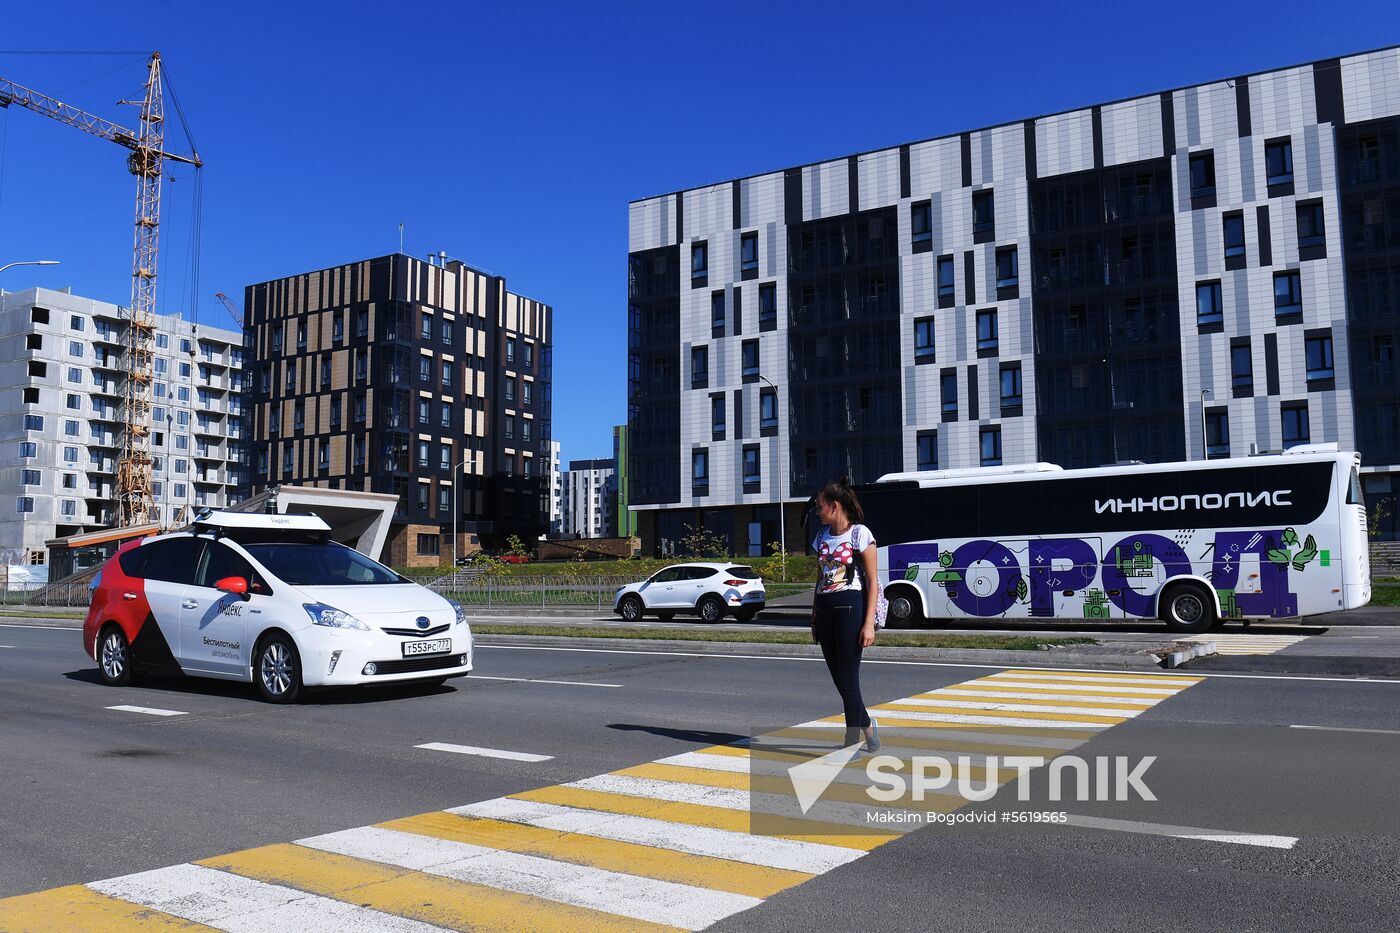 Europe's first autonomous taxi launched in Innopolis